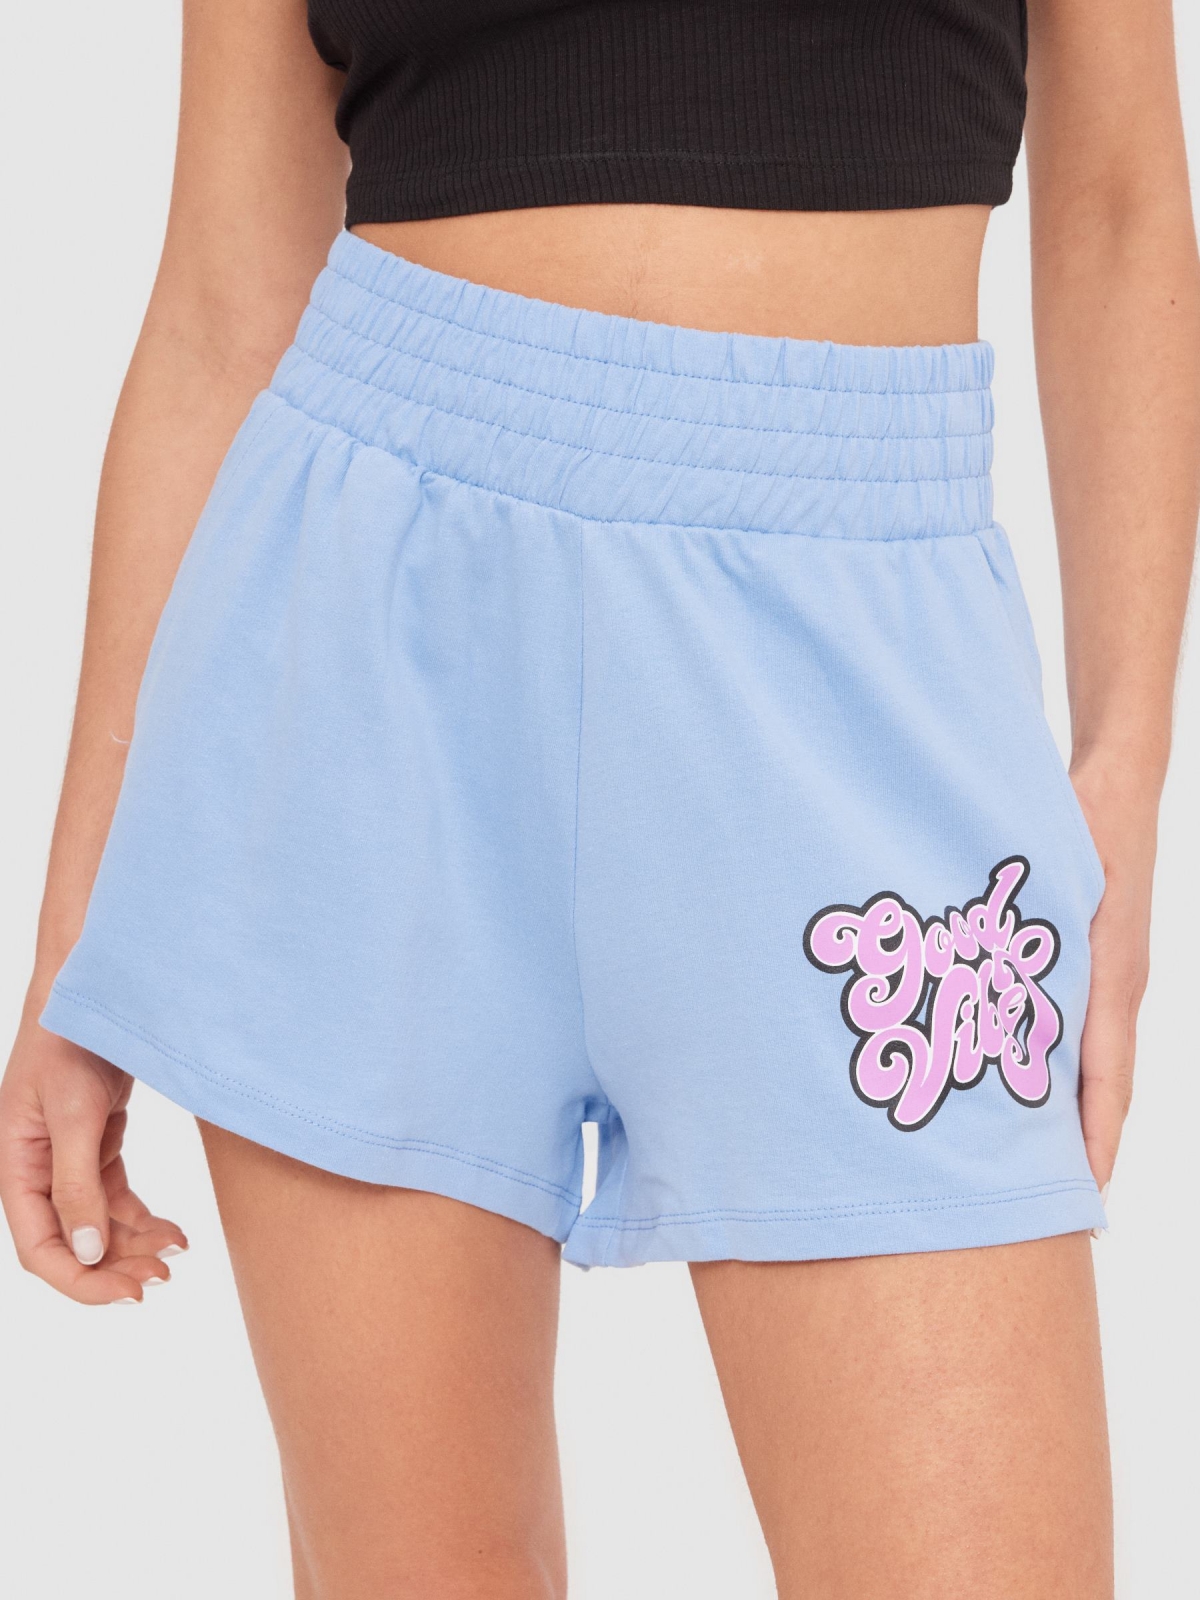 Good Vibes knitted shorts blue detail view